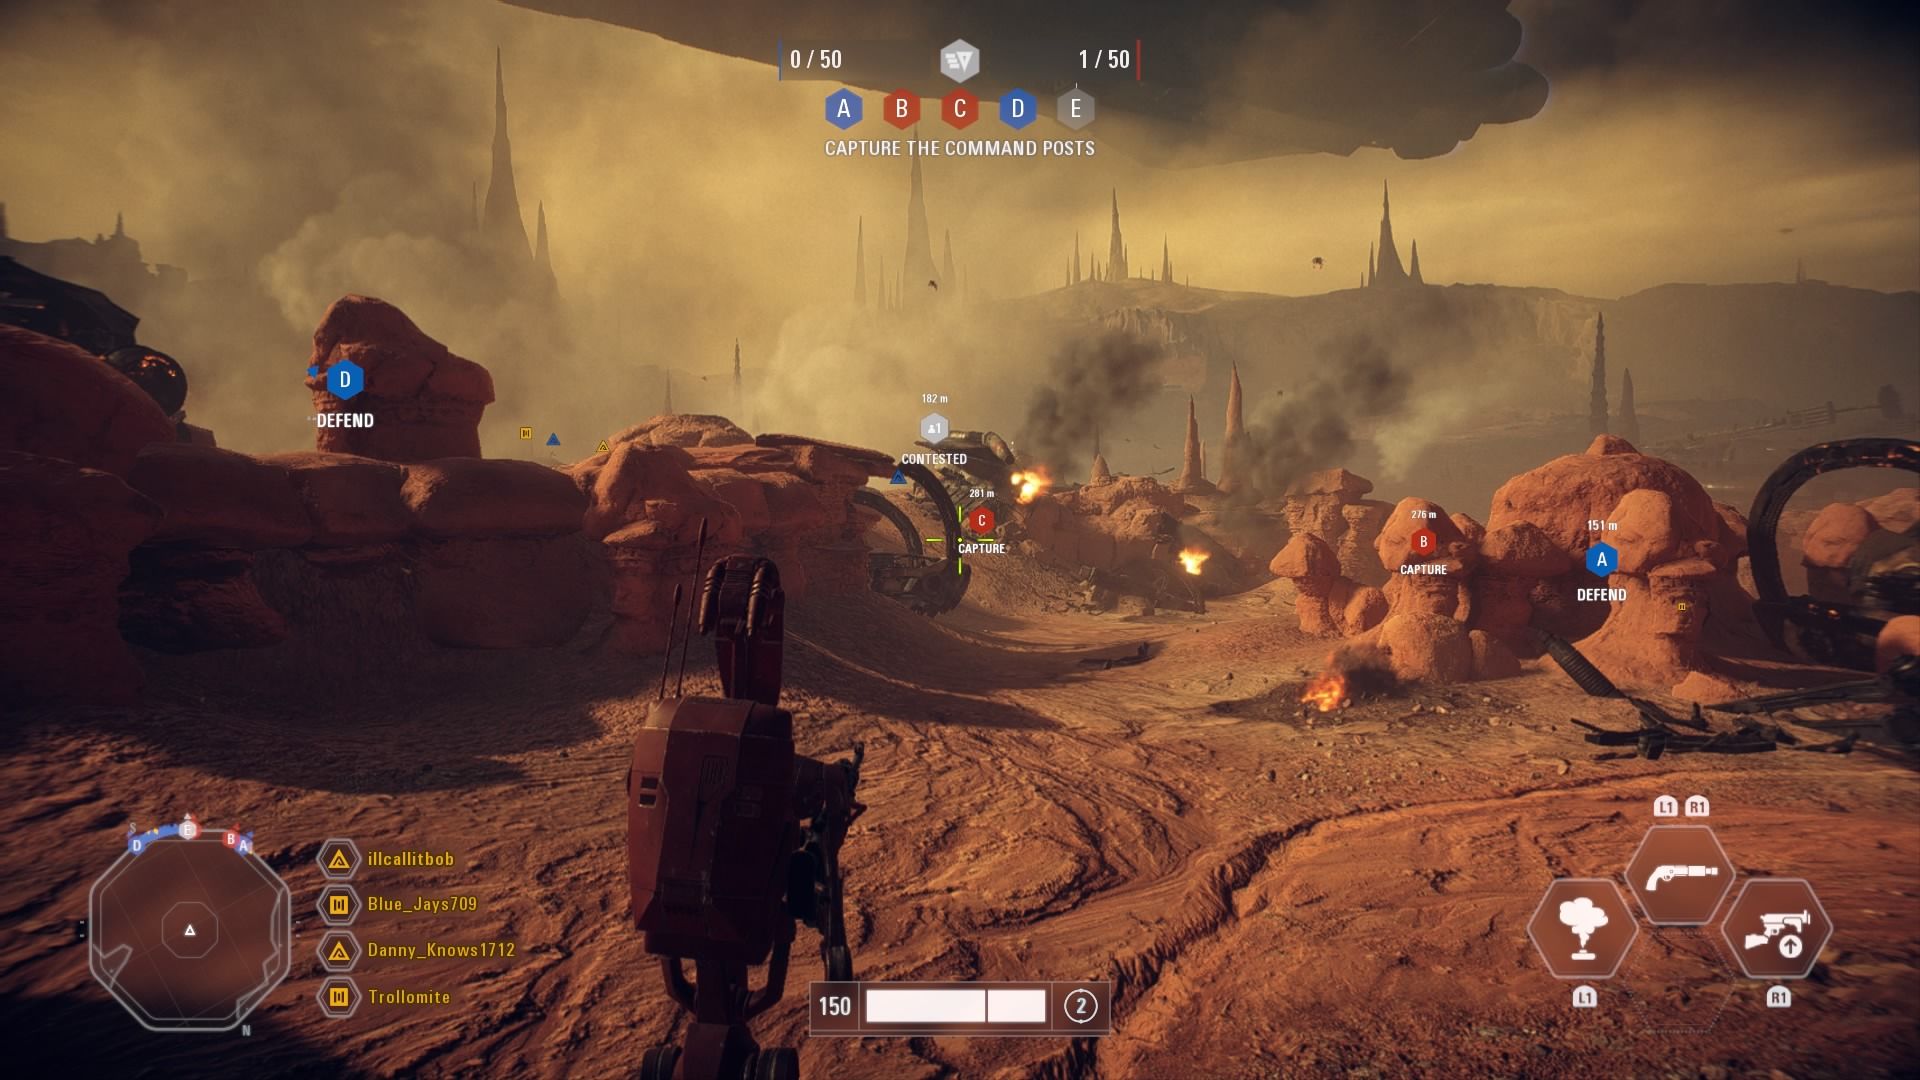 10 Reasons To Give Star Wars Battlefront 2 Another Shot